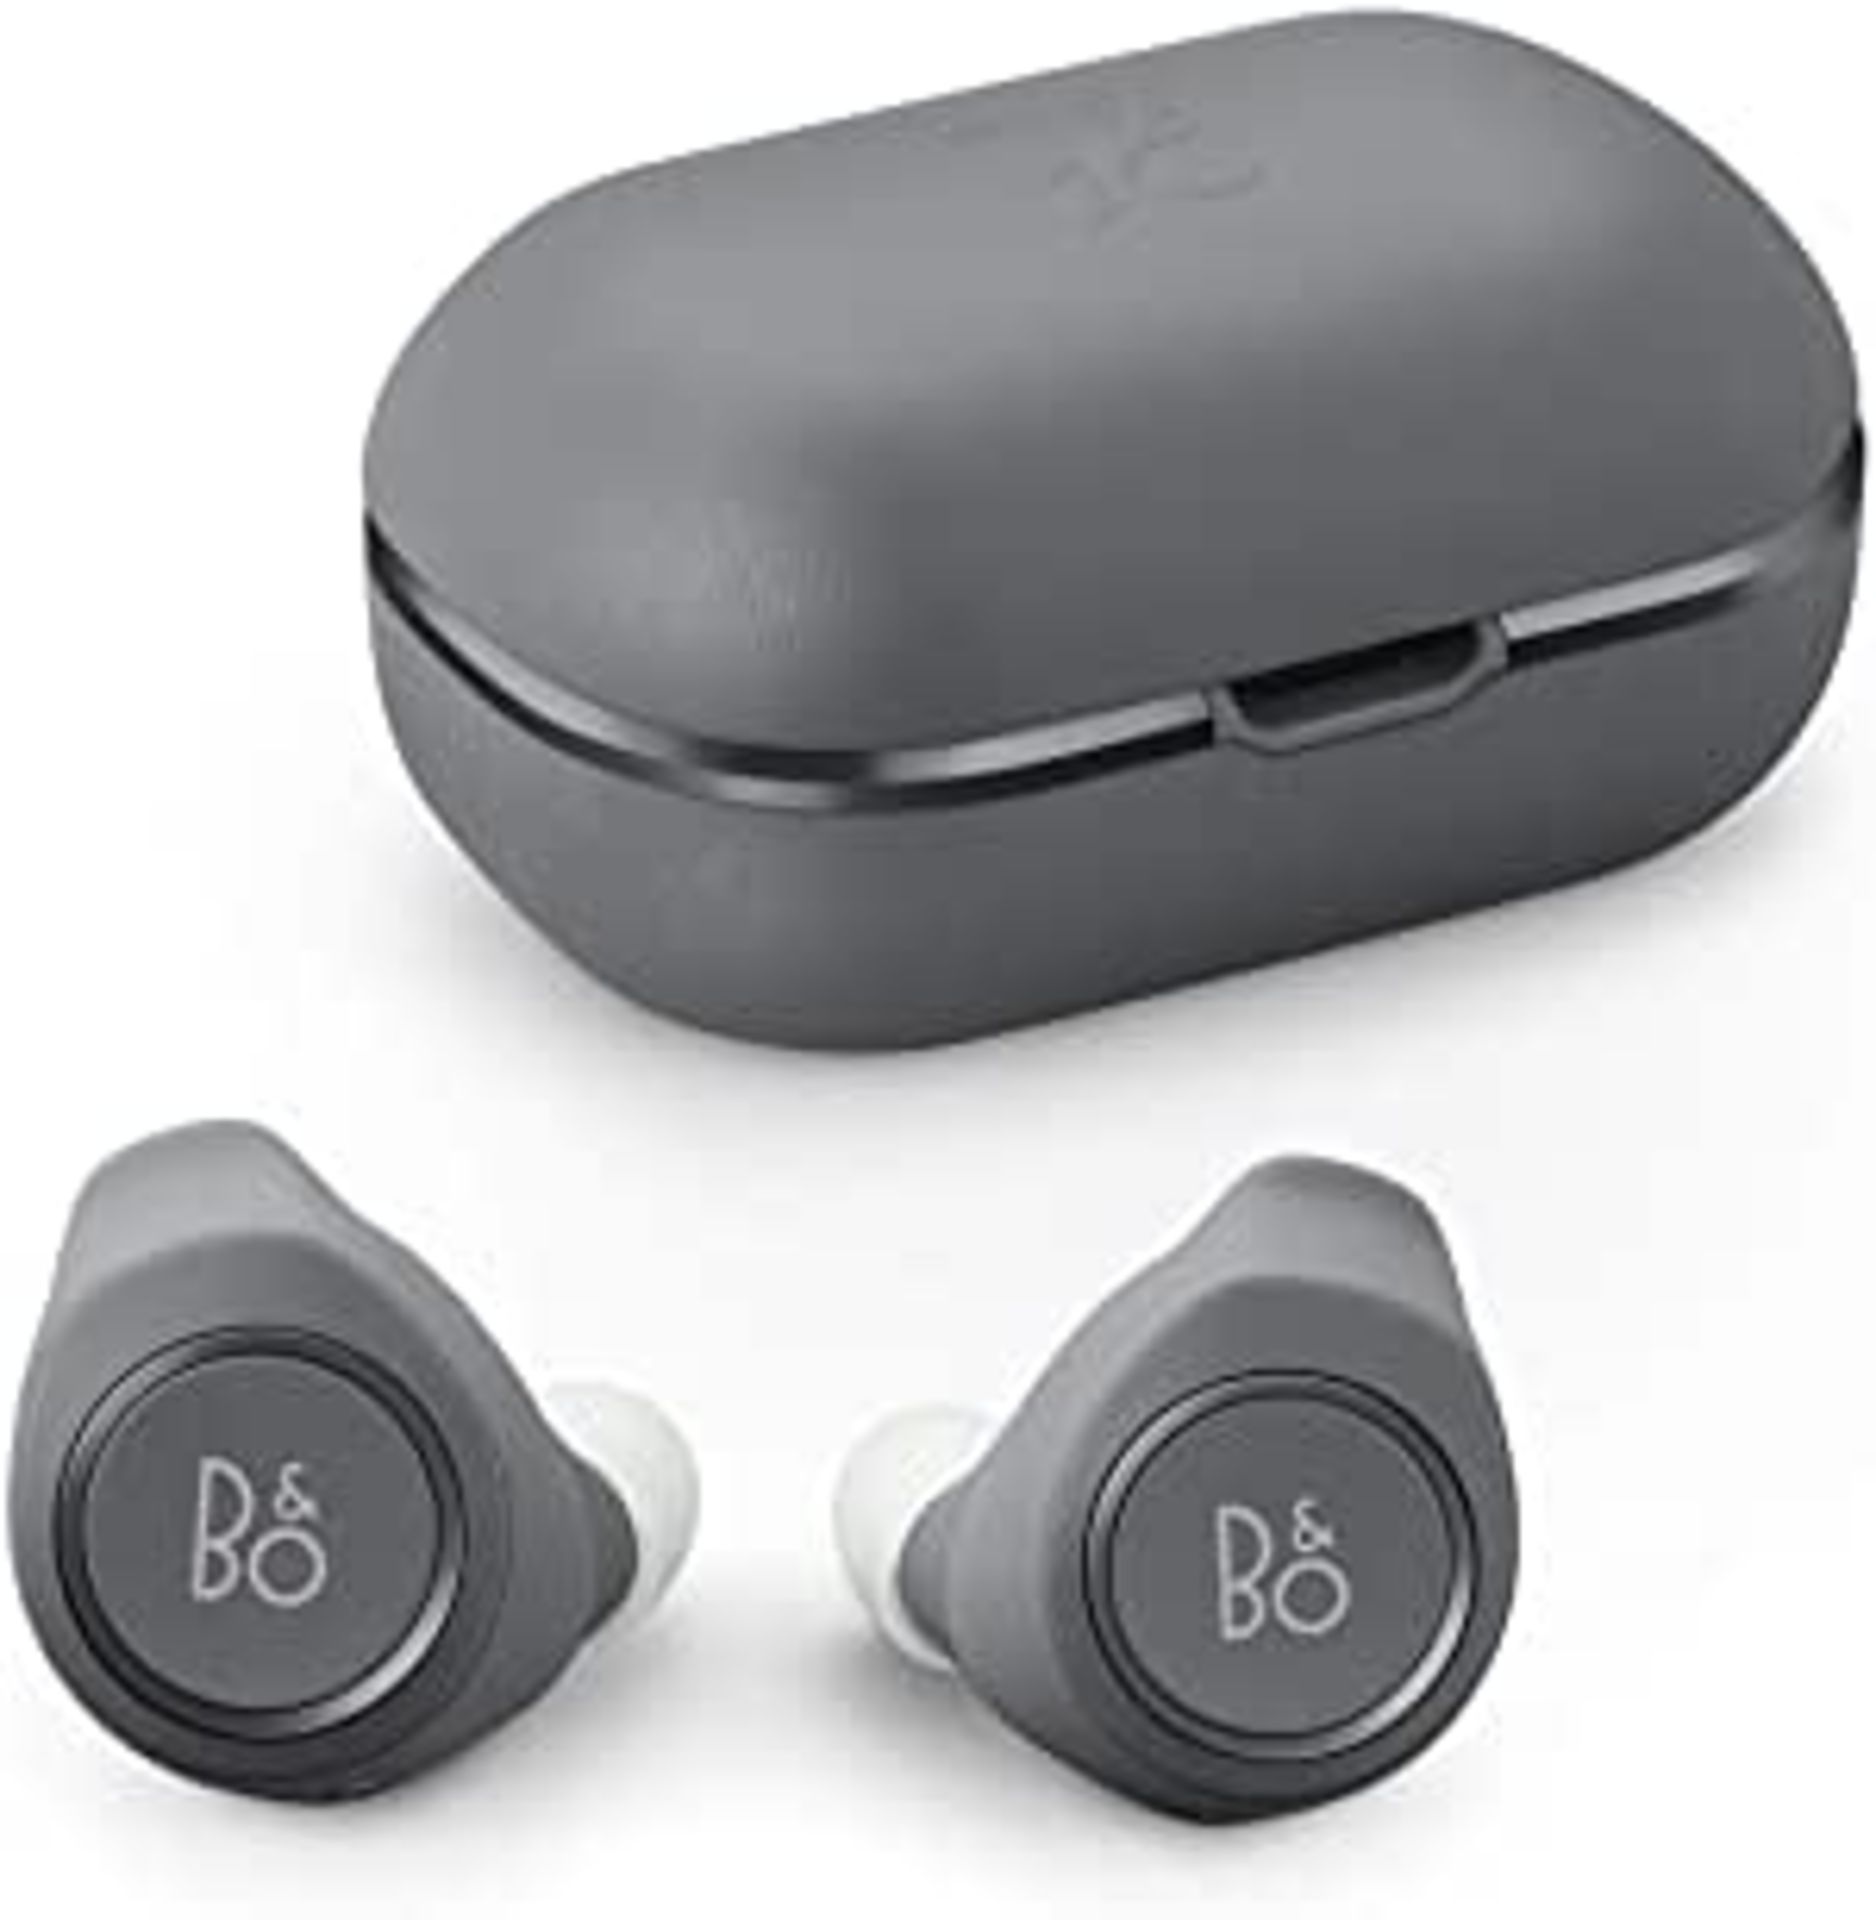 10. x set of GREY Bang and Olufsen E8 wireless earphones, boxed and brand new, Collection - Image 3 of 3